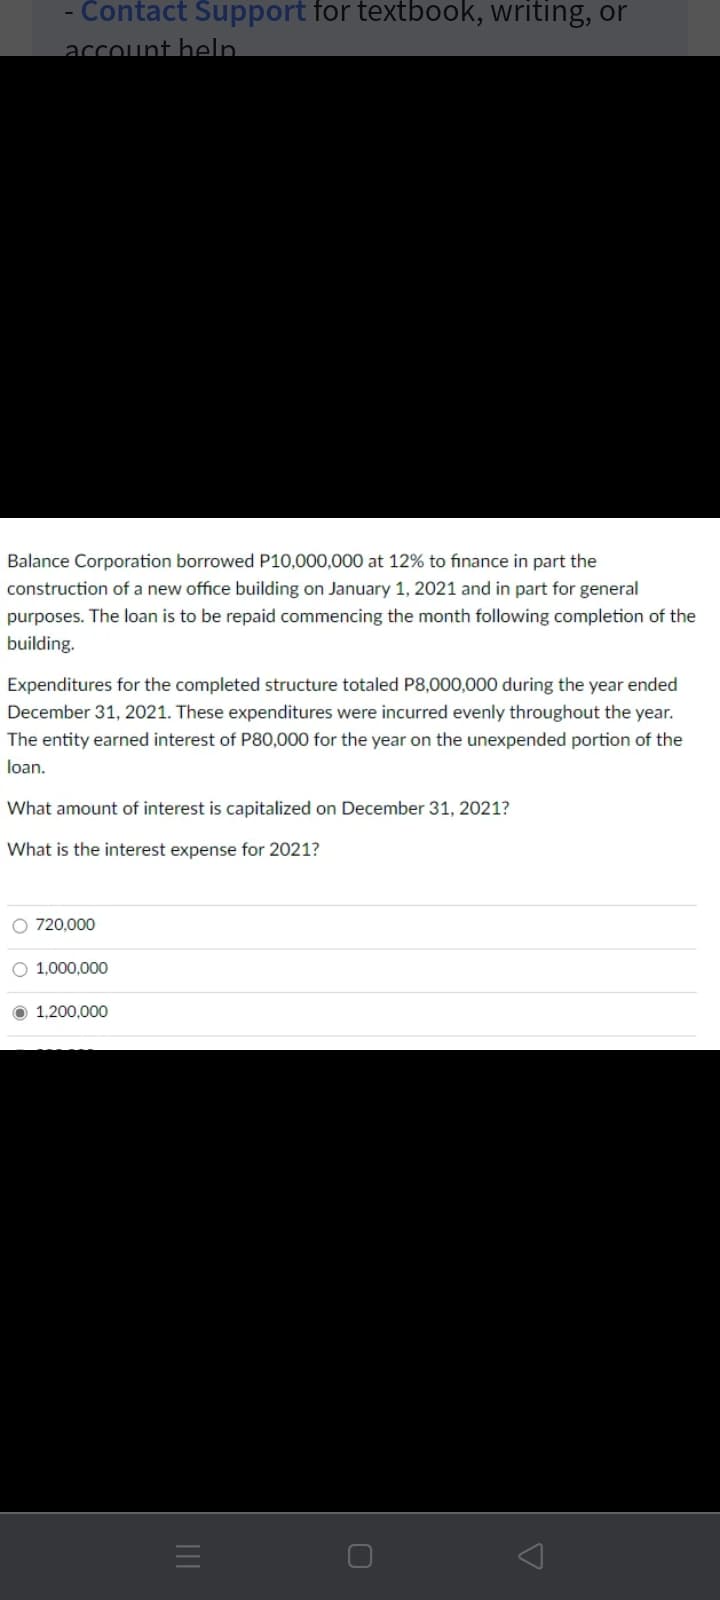 Contact Support for textbook, writing, or
account heln
Balance Corporation borrowed P10,000,000 at 12% to finance in part the
construction of a new office building on January 1, 2021 and in part for general
purposes. The loan is to be repaid commencing the month following completion of the
building.
Expenditures for the completed structure totaled P8,000,000 during the year ended
December 31, 2021. These expenditures were incurred evenly throughout the year.
The entity earned interest of P80,000 for the year on the unexpended portion of the
loan.
What amount of interest is capitalized on December 31, 2021?
What is the interest expense for 2021?
O 720,000
O 1,000,000
O 1.200.000
